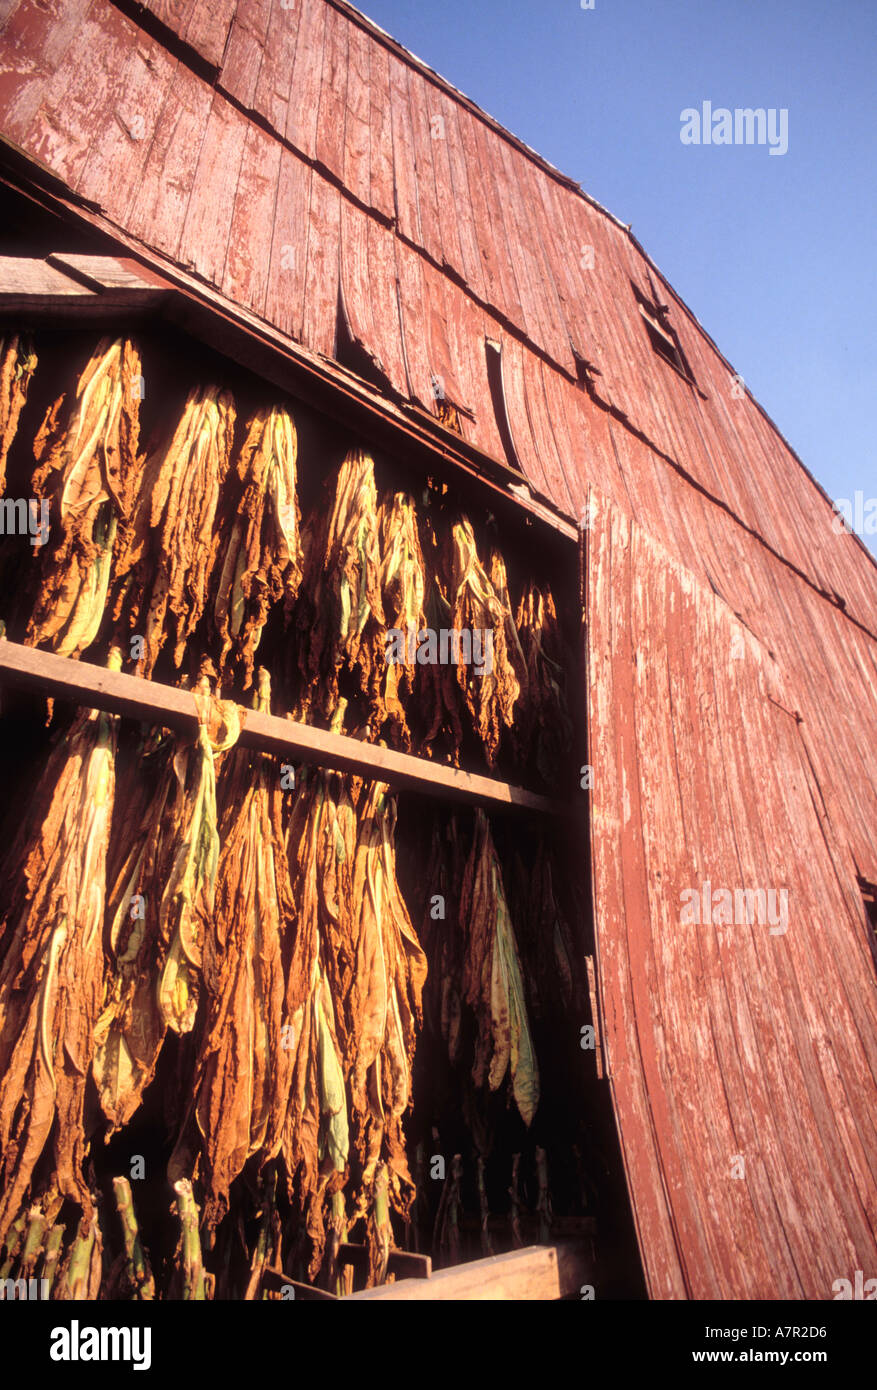 Tobacco drying in barn in USA Tennessee after harvest for cigars and cigarettes which are cancer causing with nicotine Stock Photo